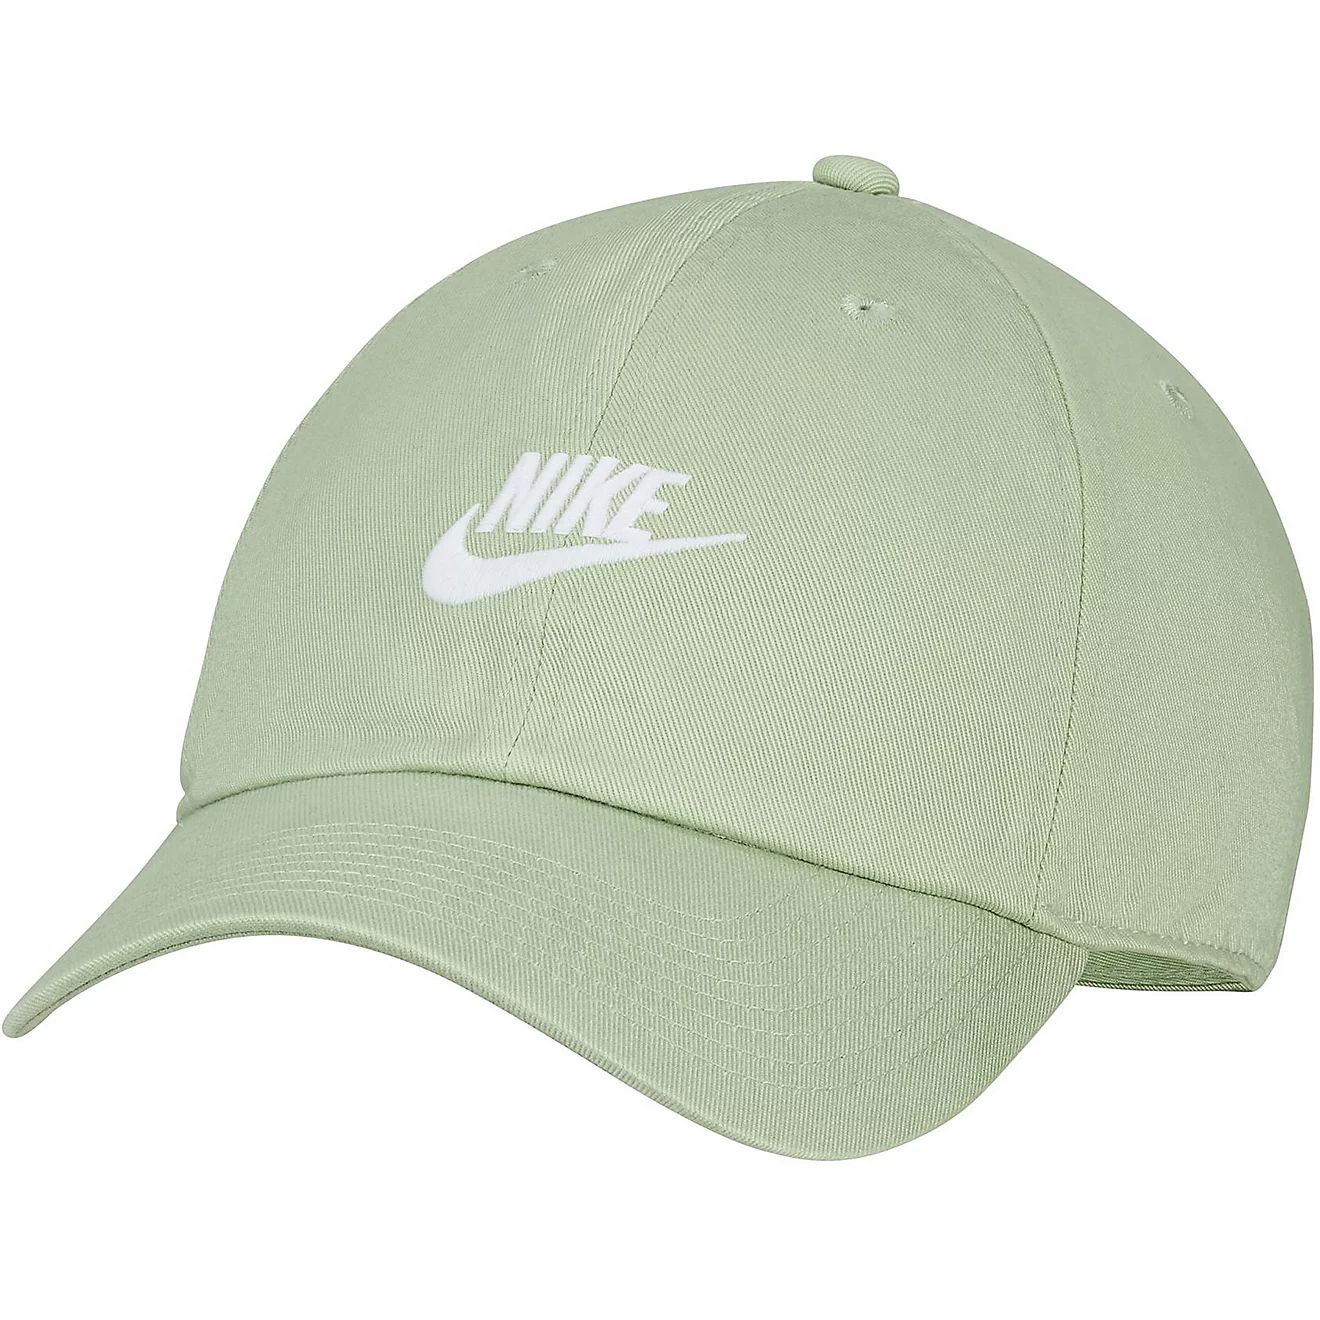 Nike Women's Club Cap | Free Shipping at Academy | Academy Sports + Outdoors